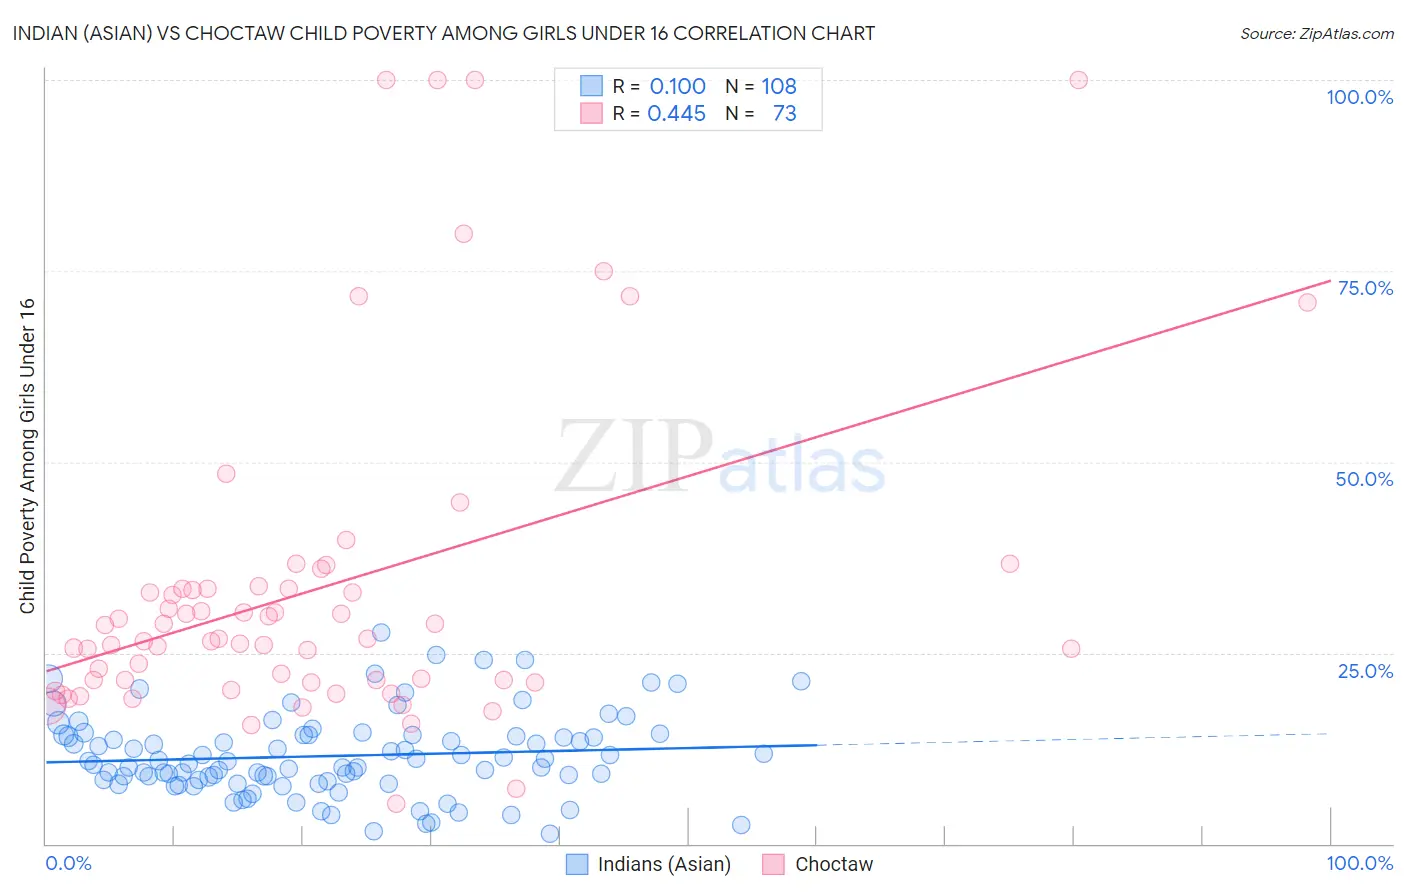 Indian (Asian) vs Choctaw Child Poverty Among Girls Under 16